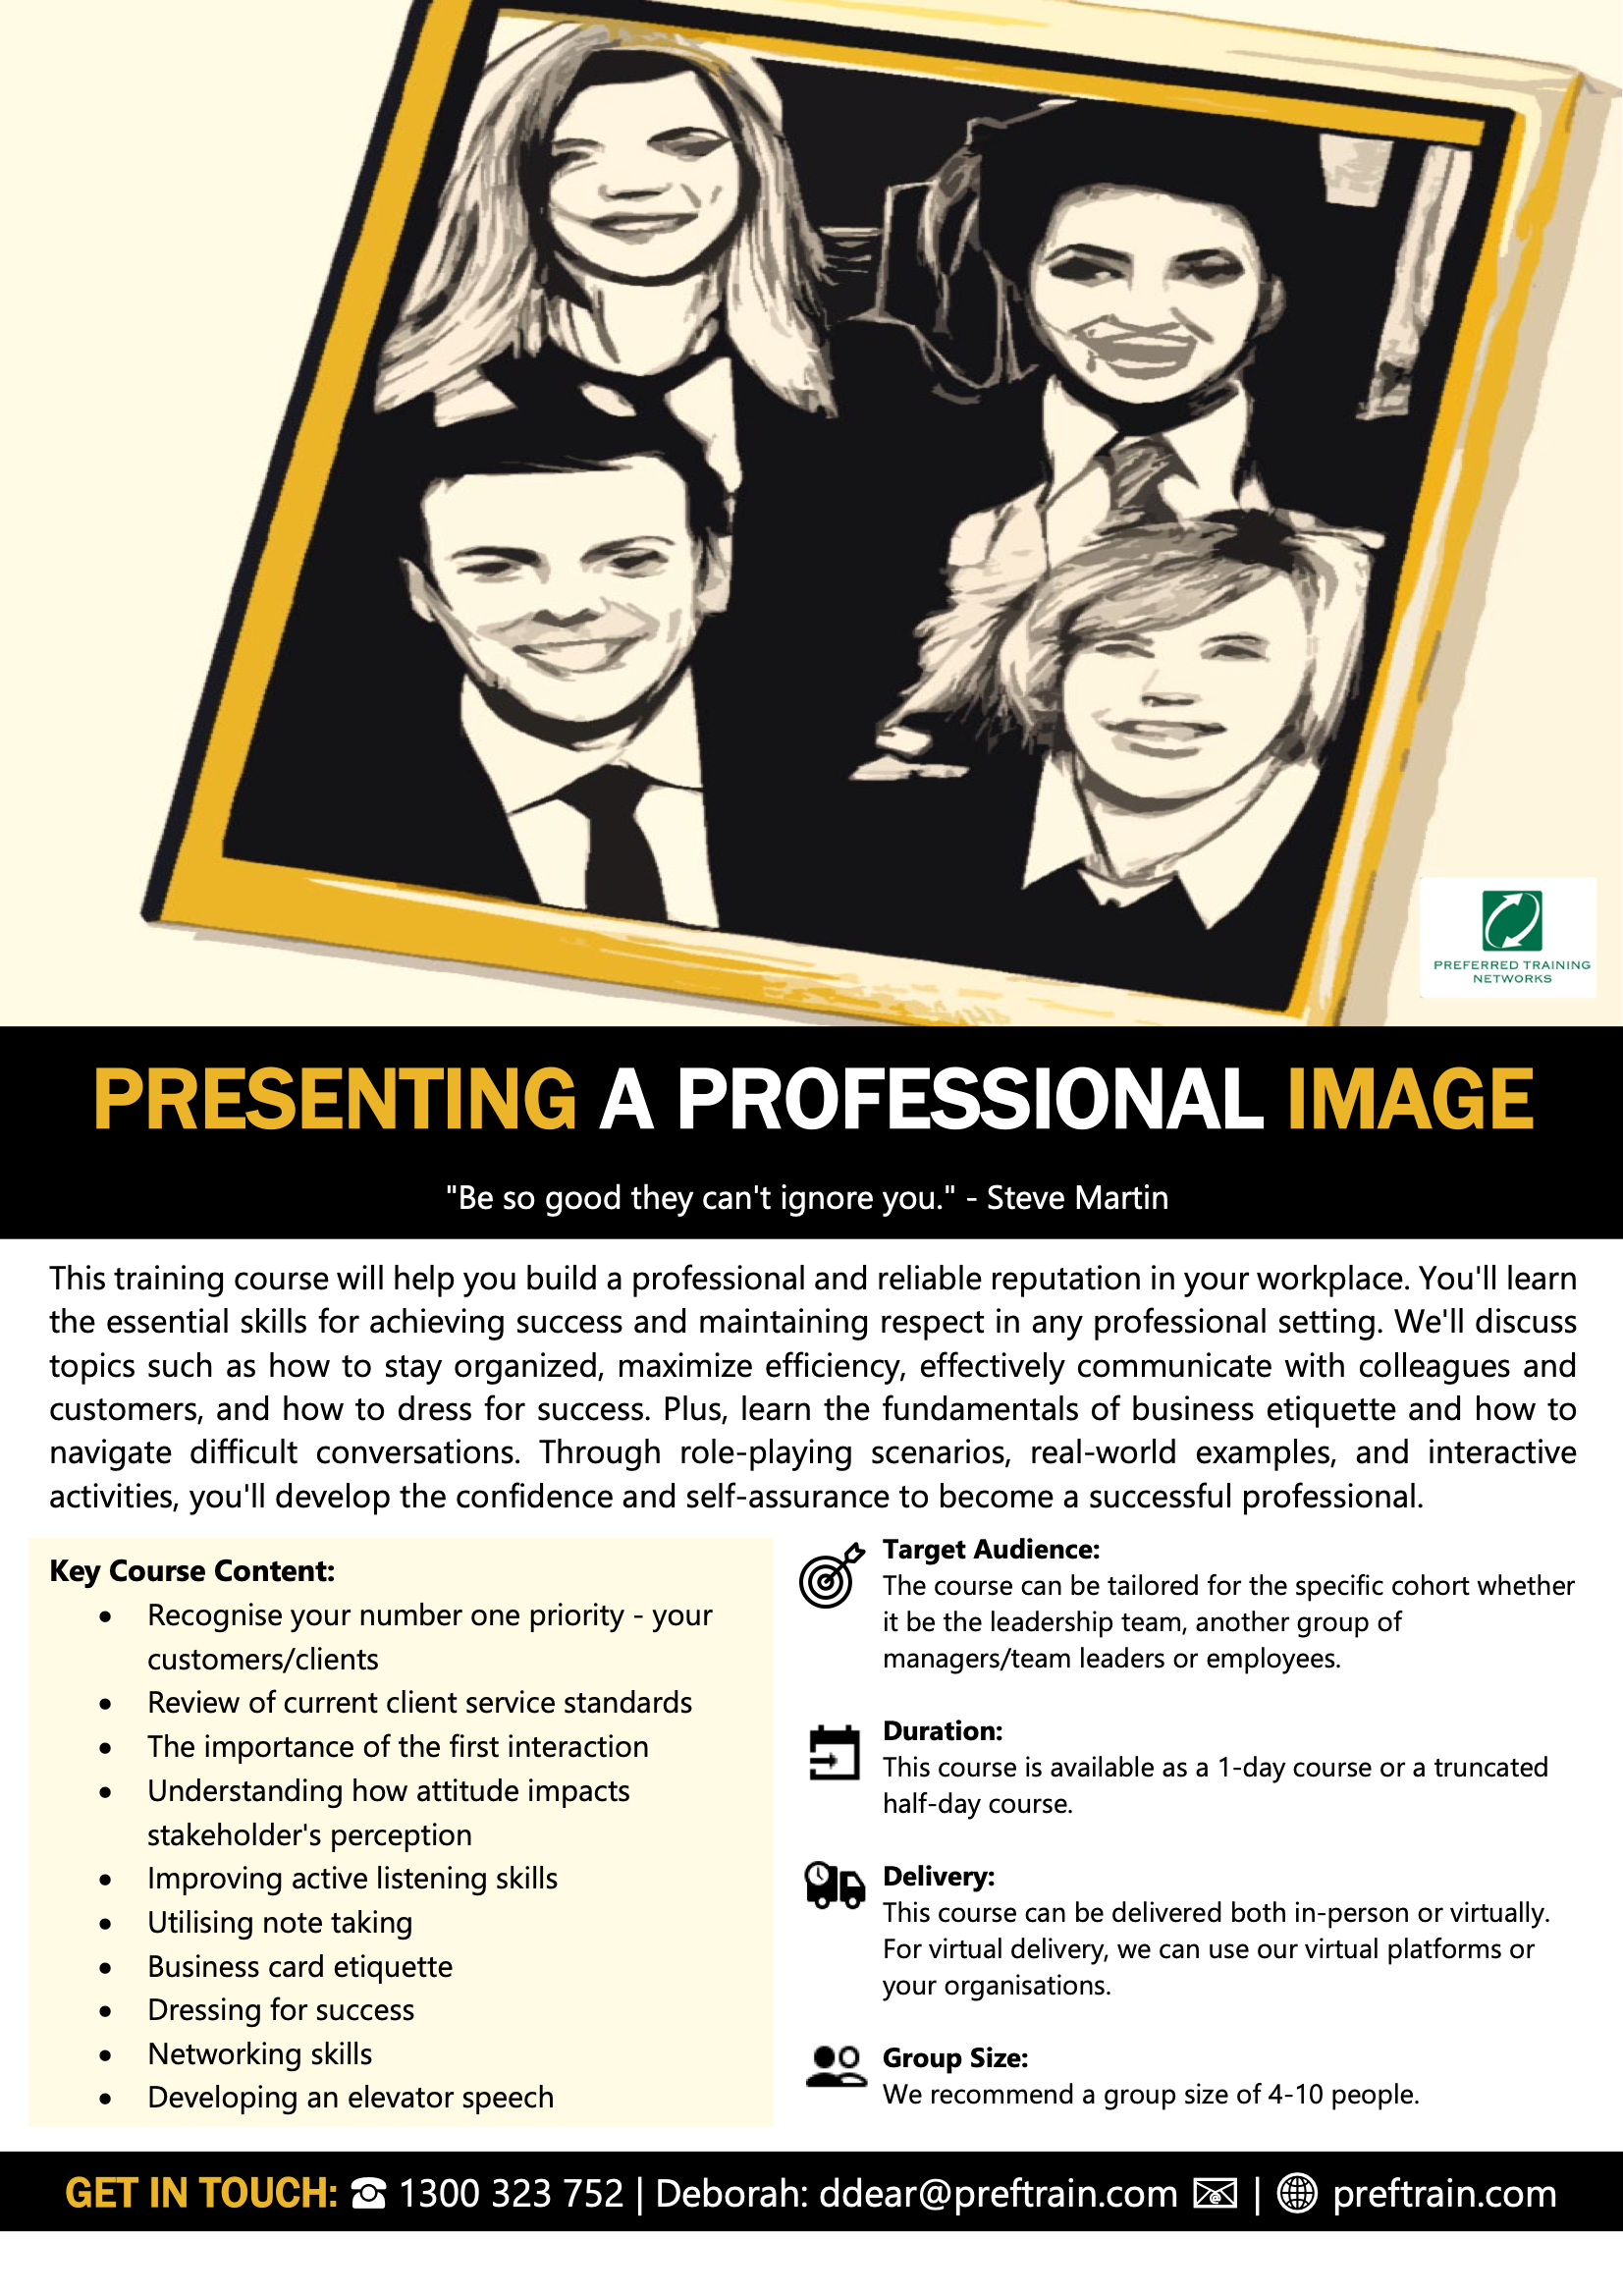 Presenting a Professional Image